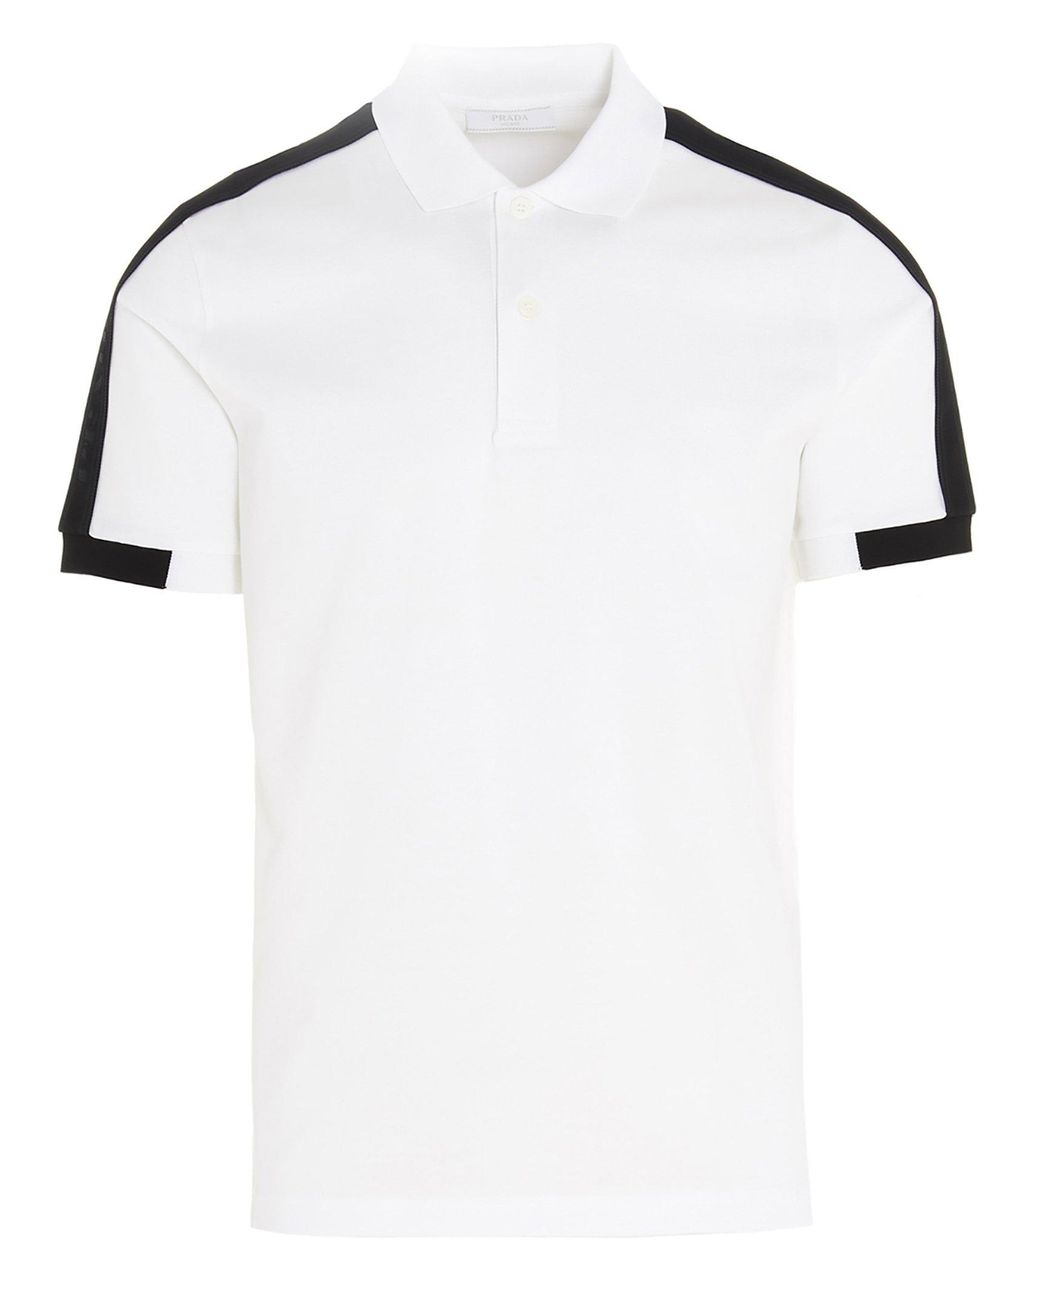 Prada Cotton Tricot Detailed Polo Shirt in White for Men - Lyst